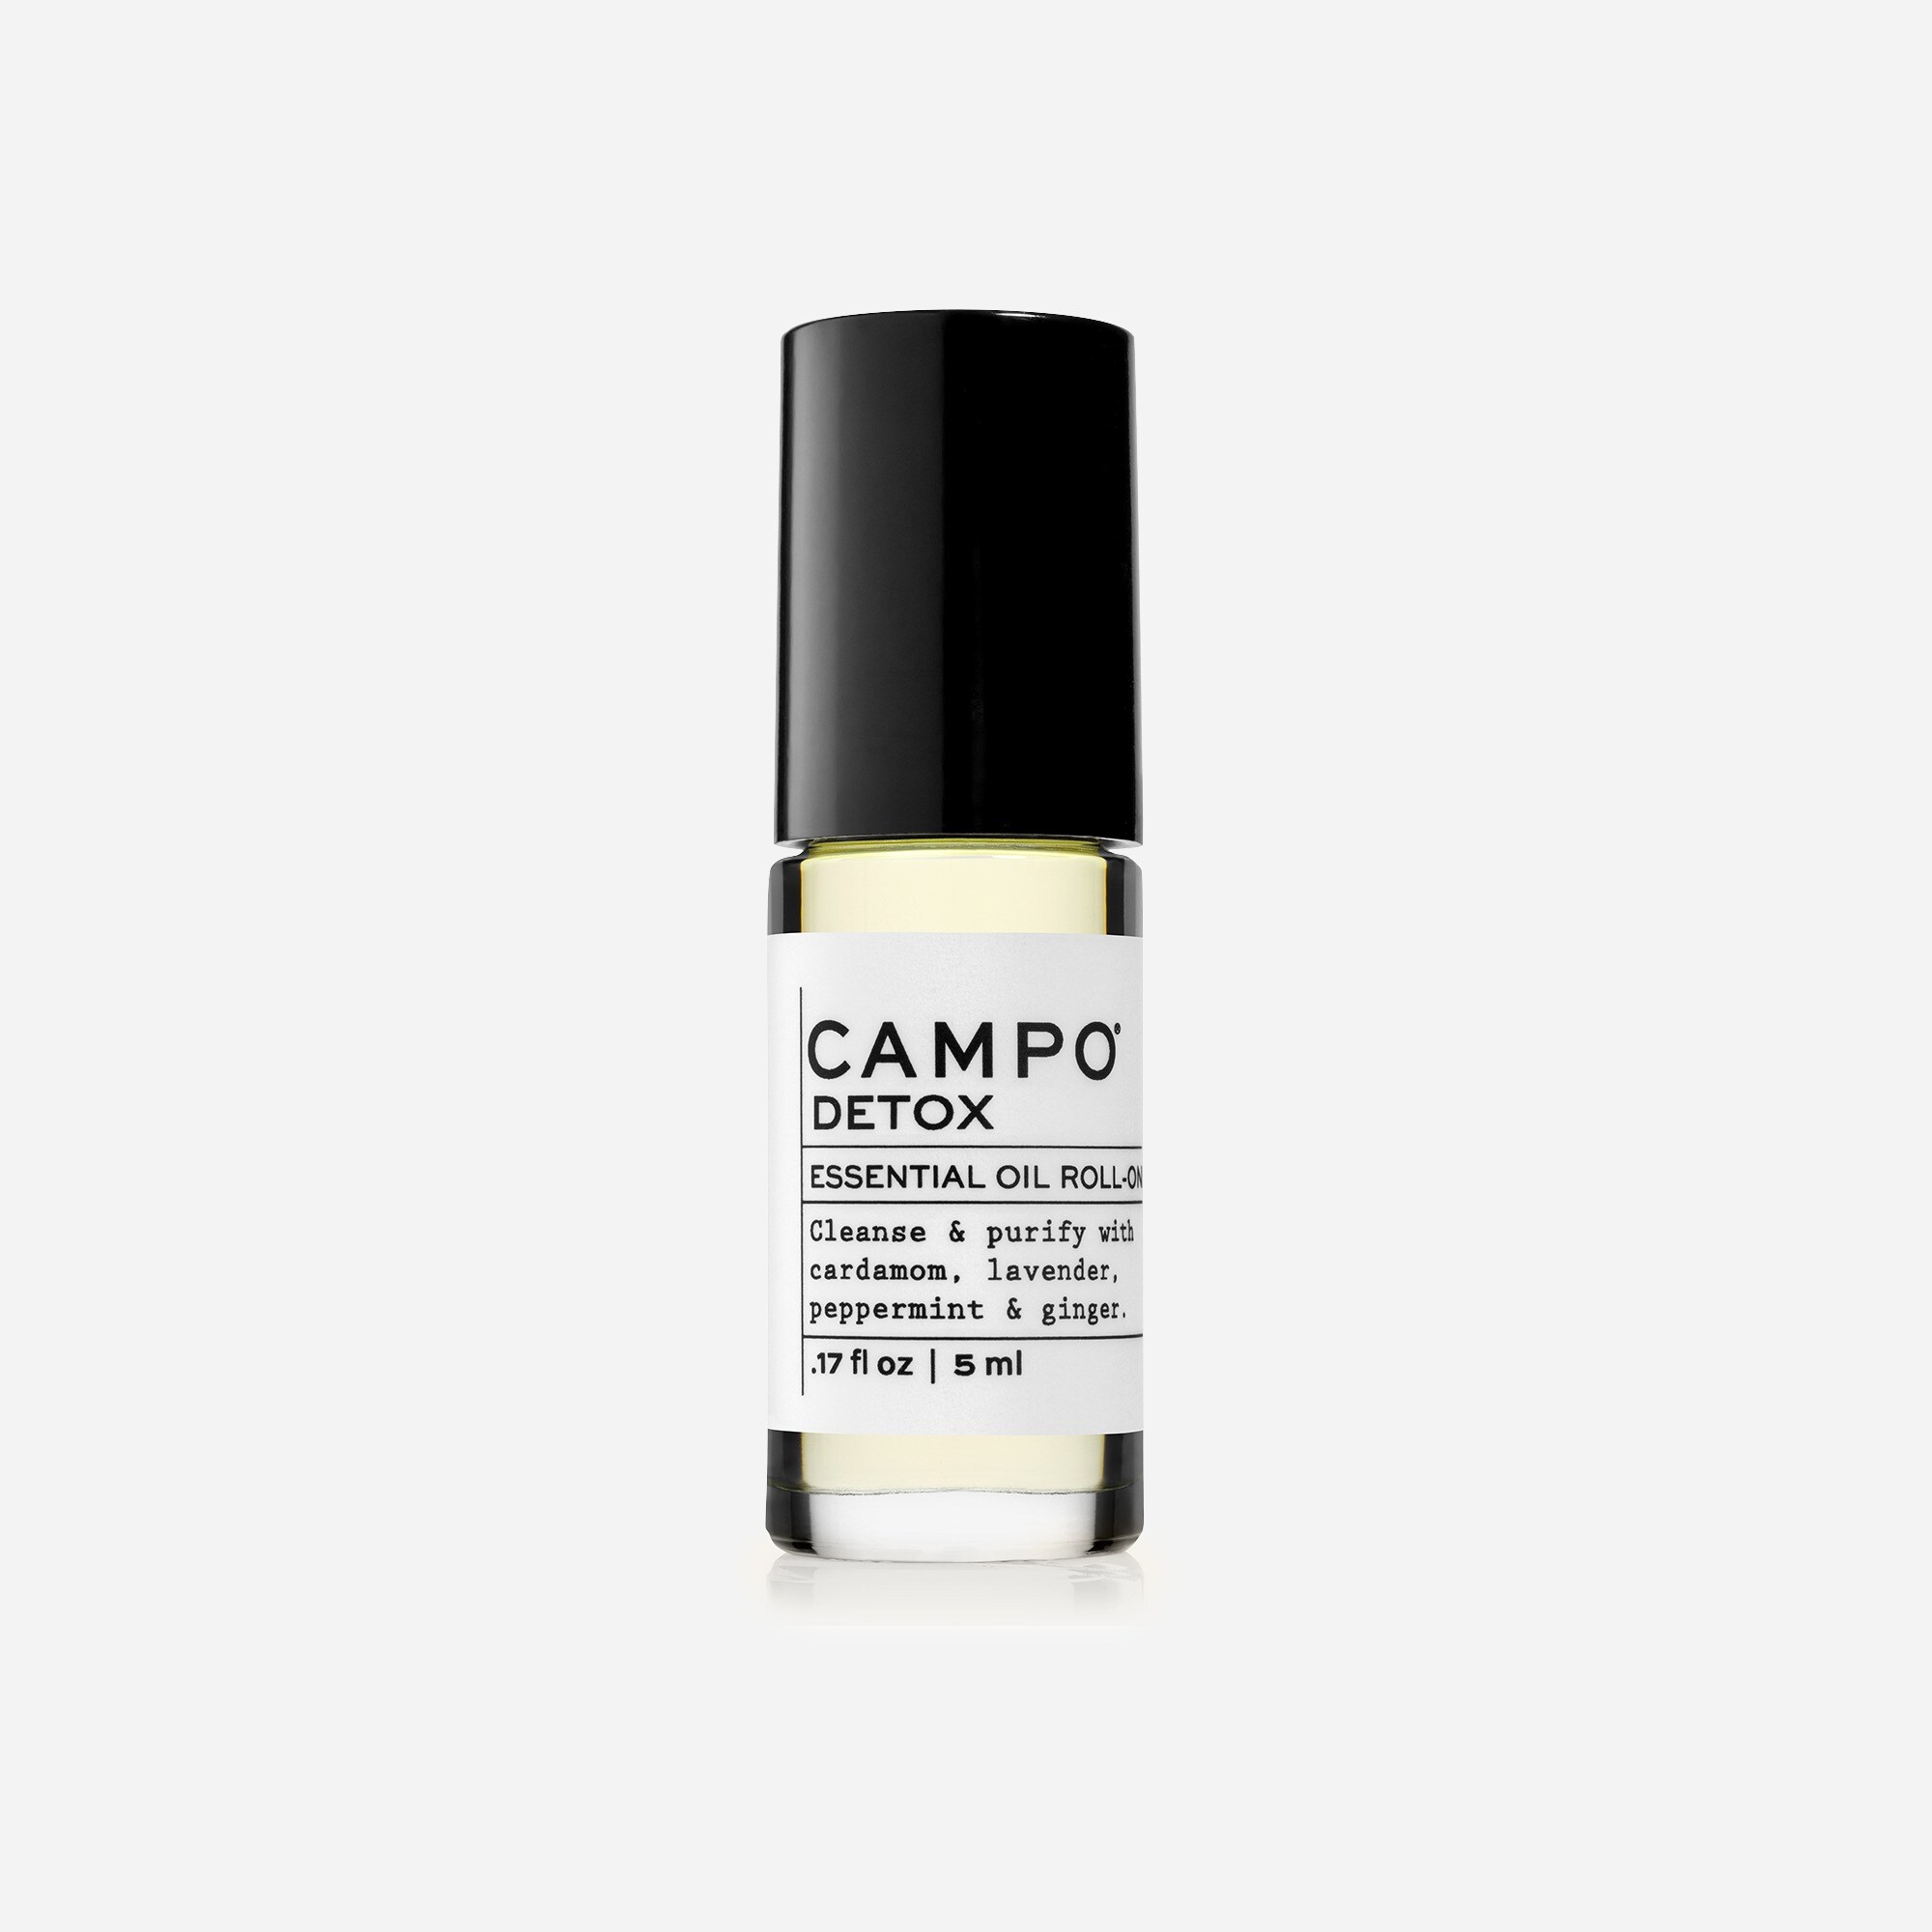  CAMPO® DETOX roll-on oil